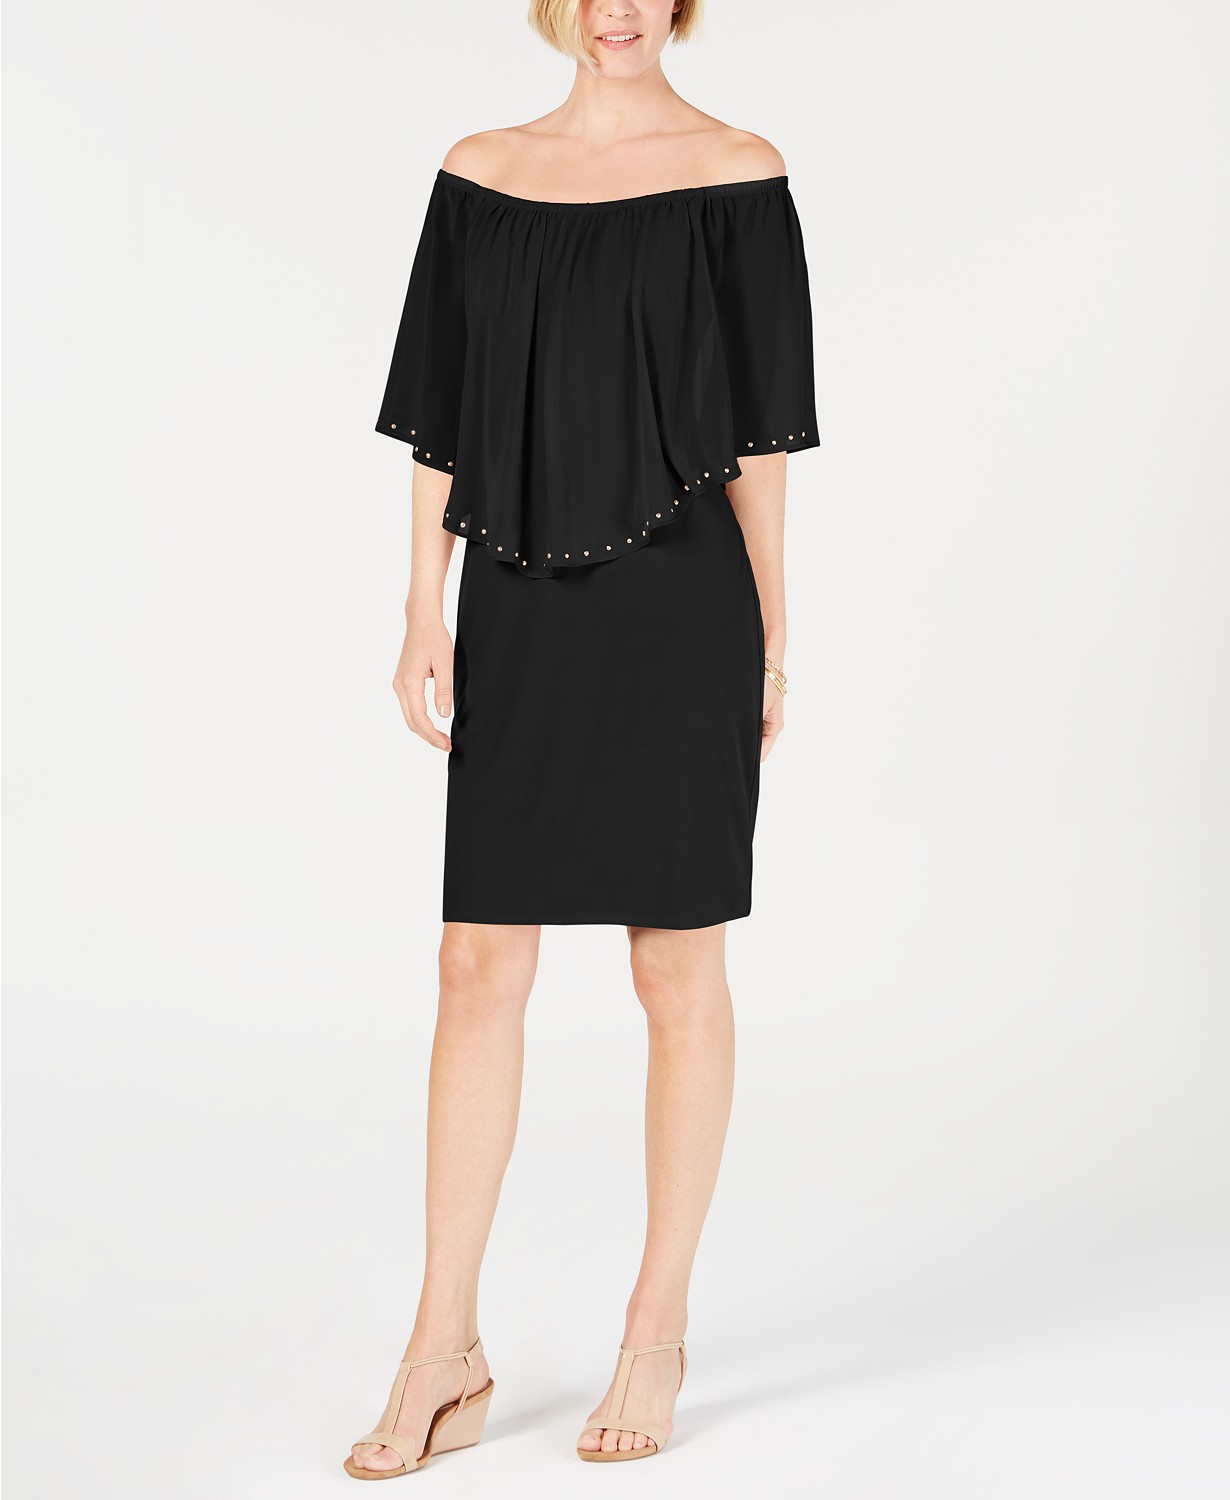 JM Collection On, Off or One Shoulder Dress, Created for Macy's